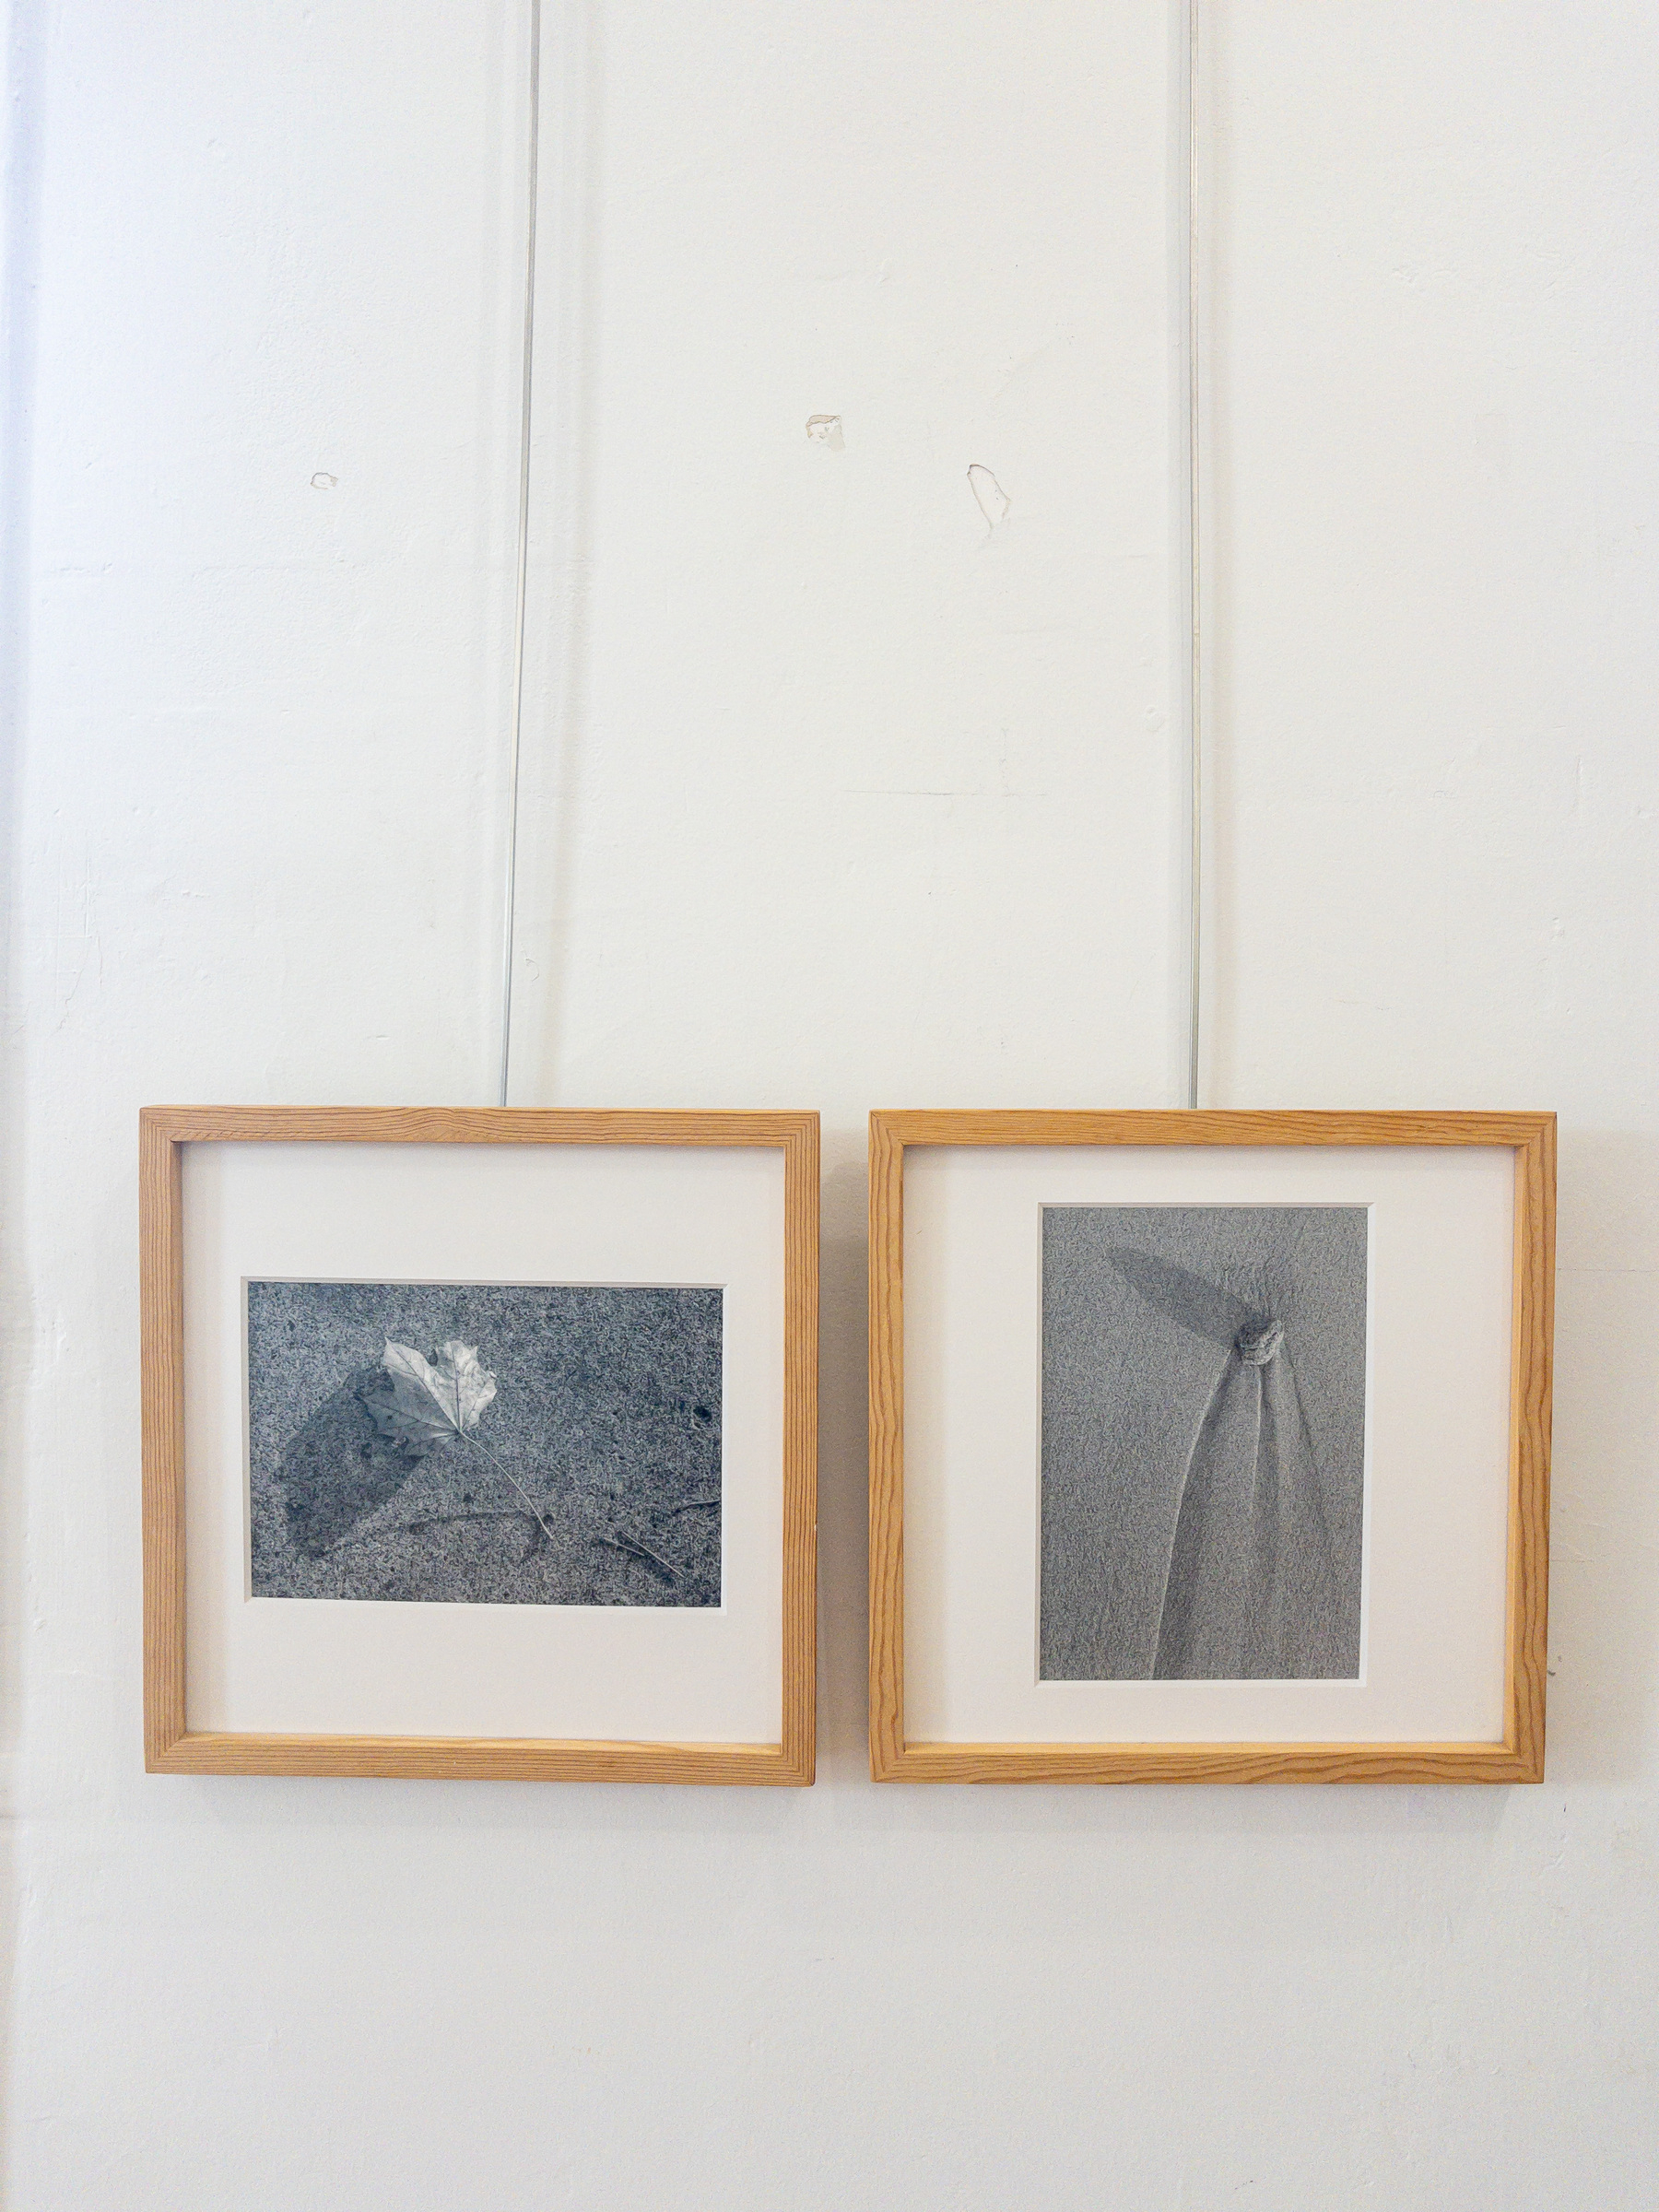 Two framed photographs at an exhibition depicting a leaf and shadow and a stone on the beach with erosion trails extending down from it.